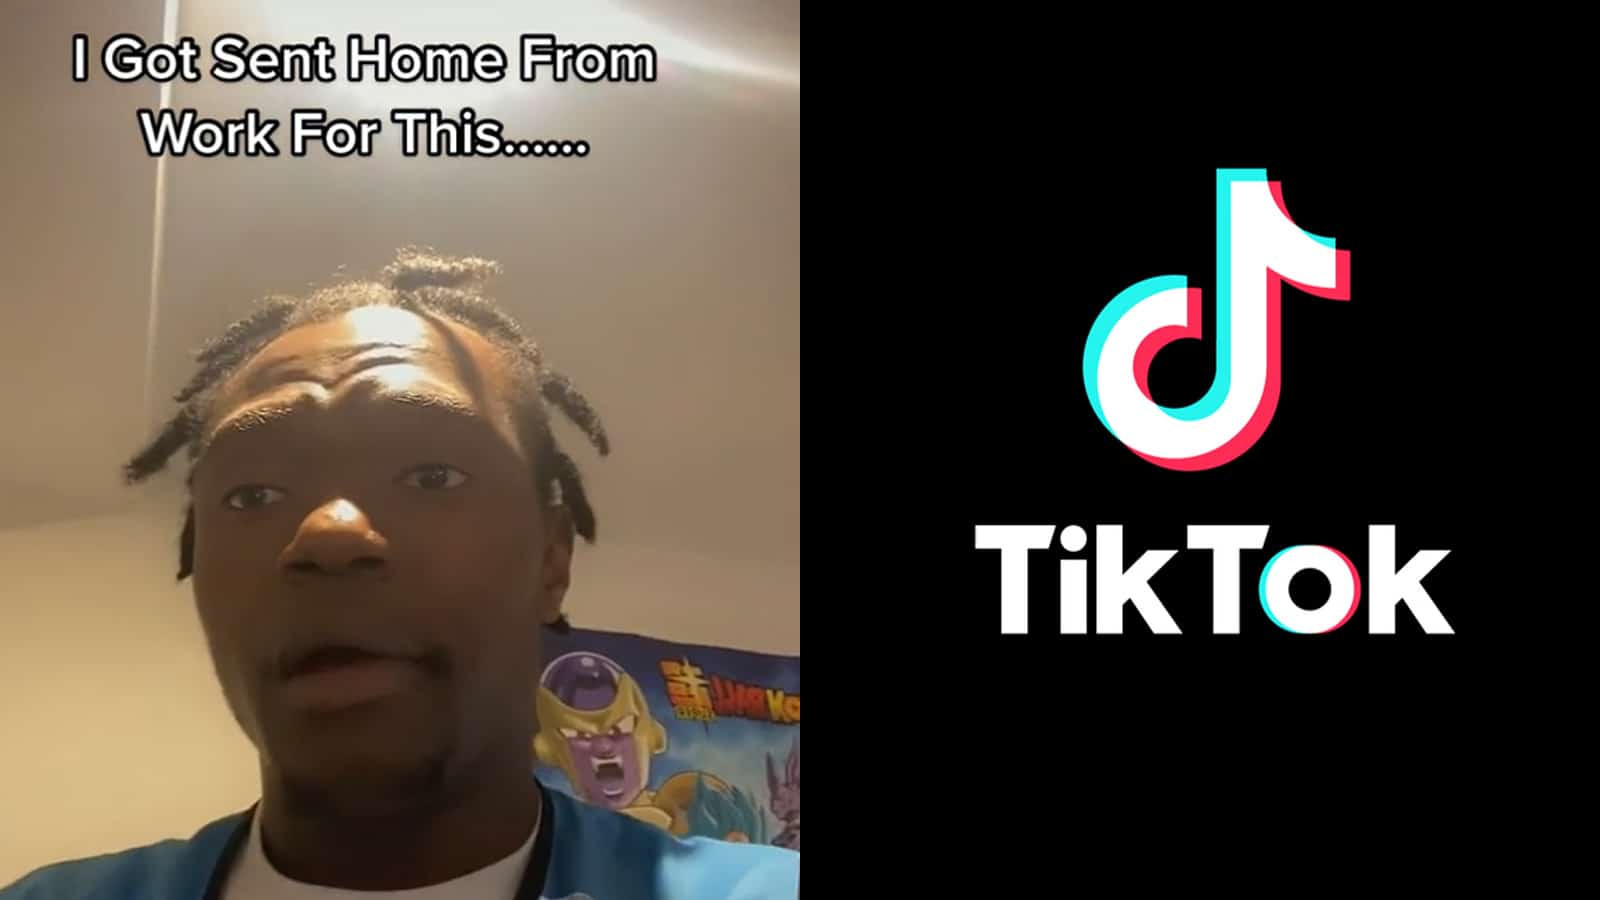 TikToker claims he was sent home for pooping